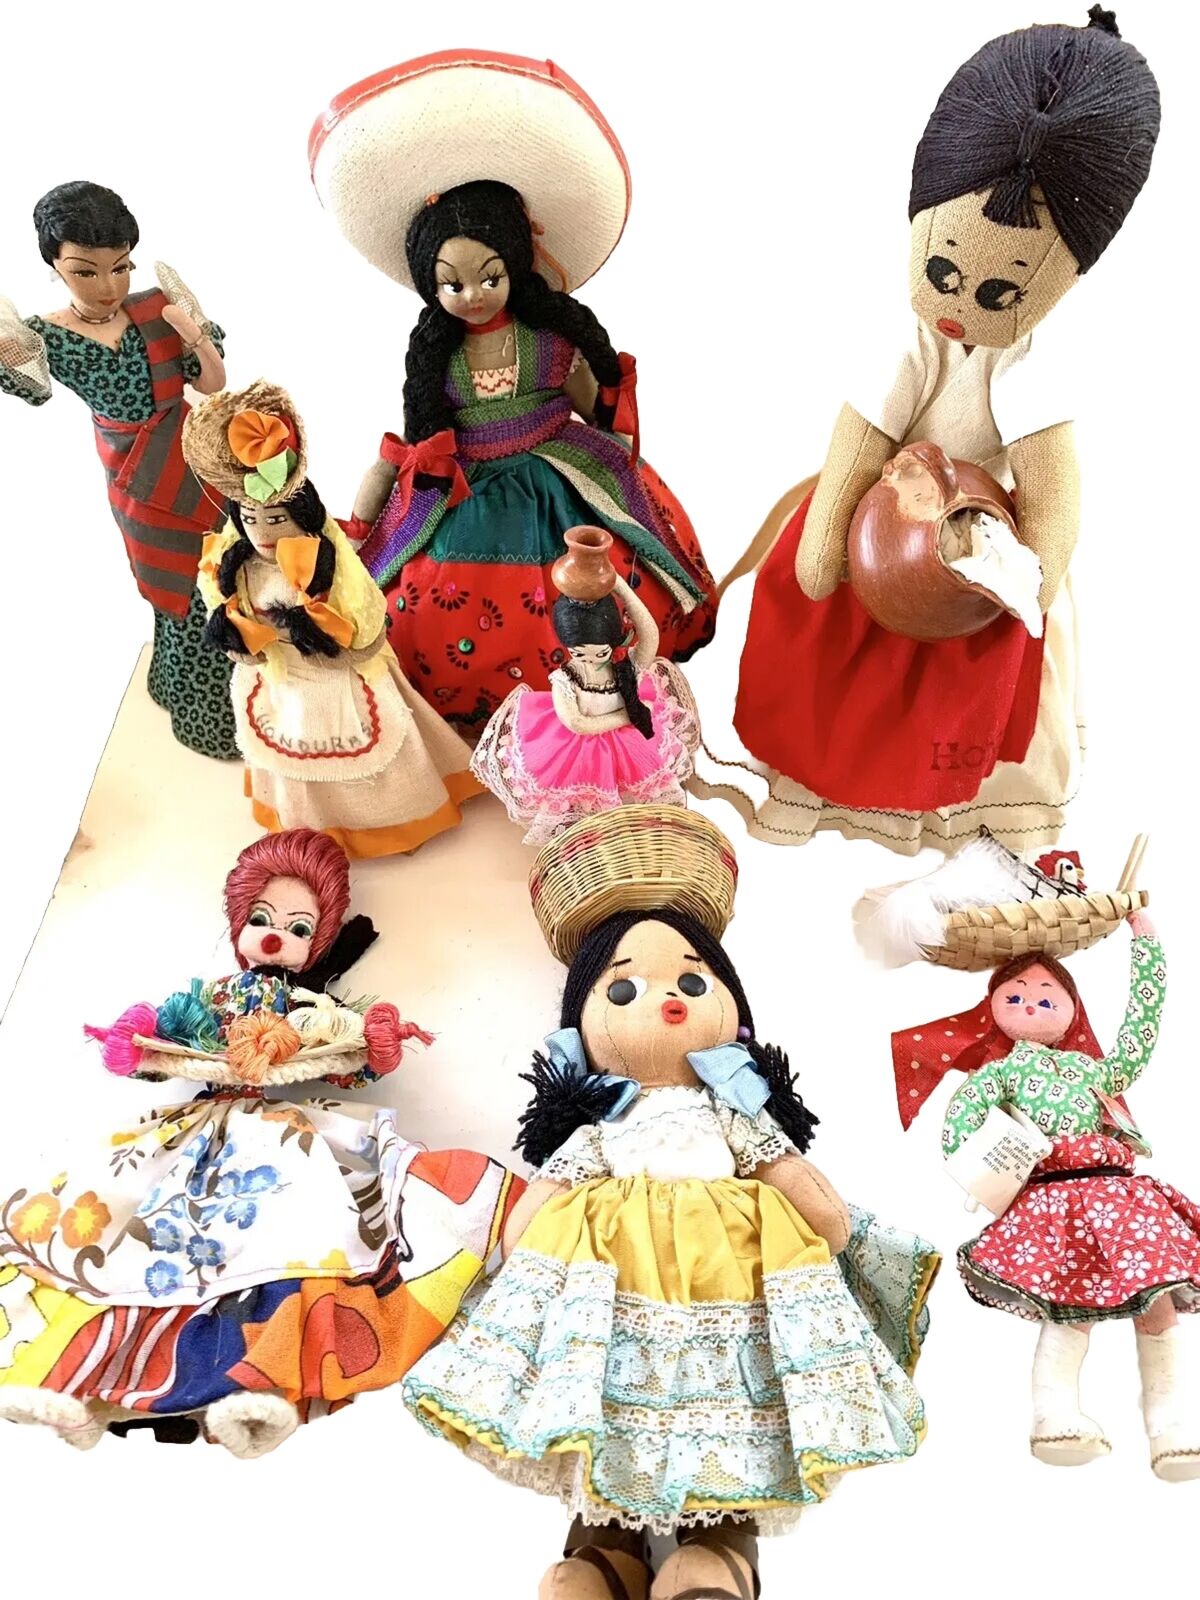 8 Folk Art Lot Cloth Ethnic Dolls Painted Sewn Pottery Vessels 6” - 12” Colorful